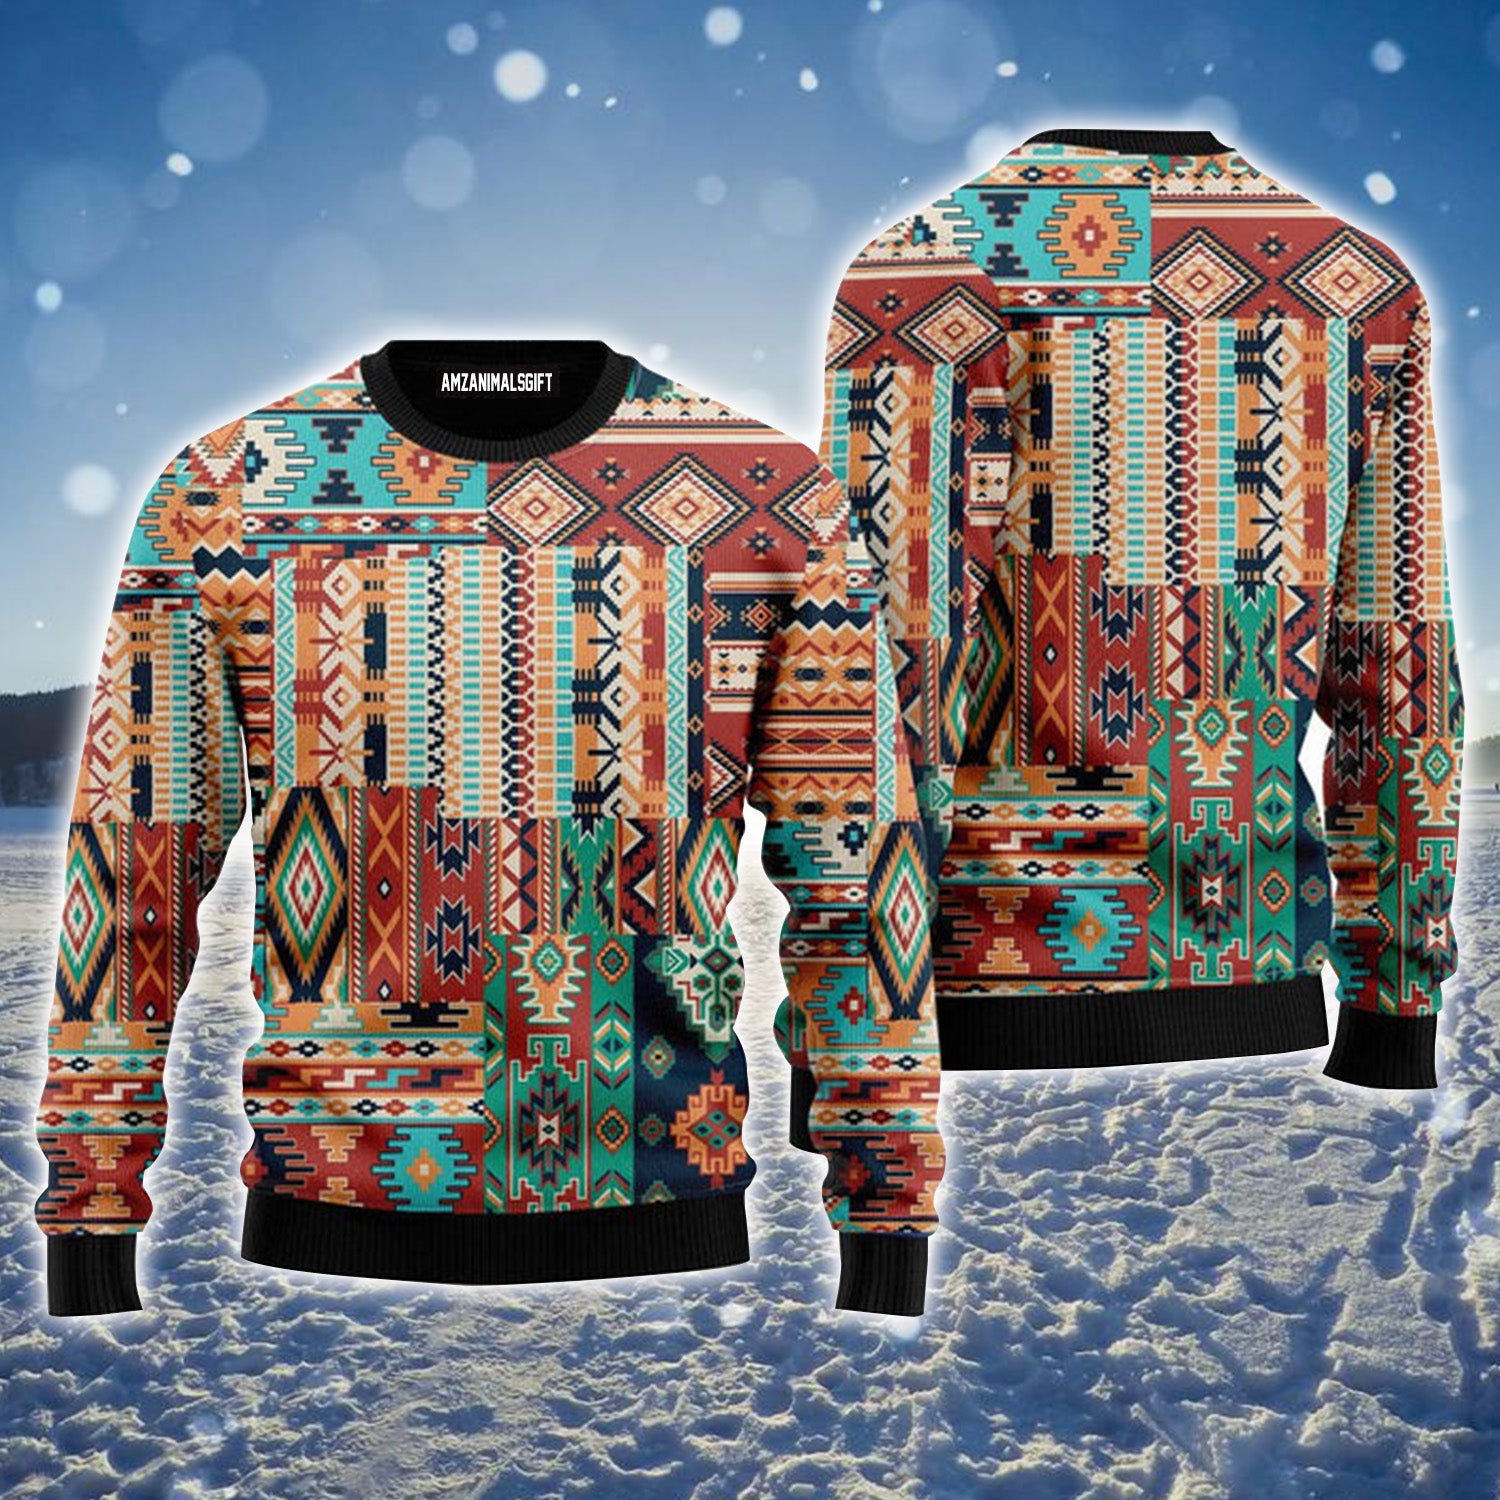 Native American Patchwork Urly Christmas Sweater, Christmas Sweater For Men & Women - Perfect Gift For Christmas, New Year, Winter Holiday